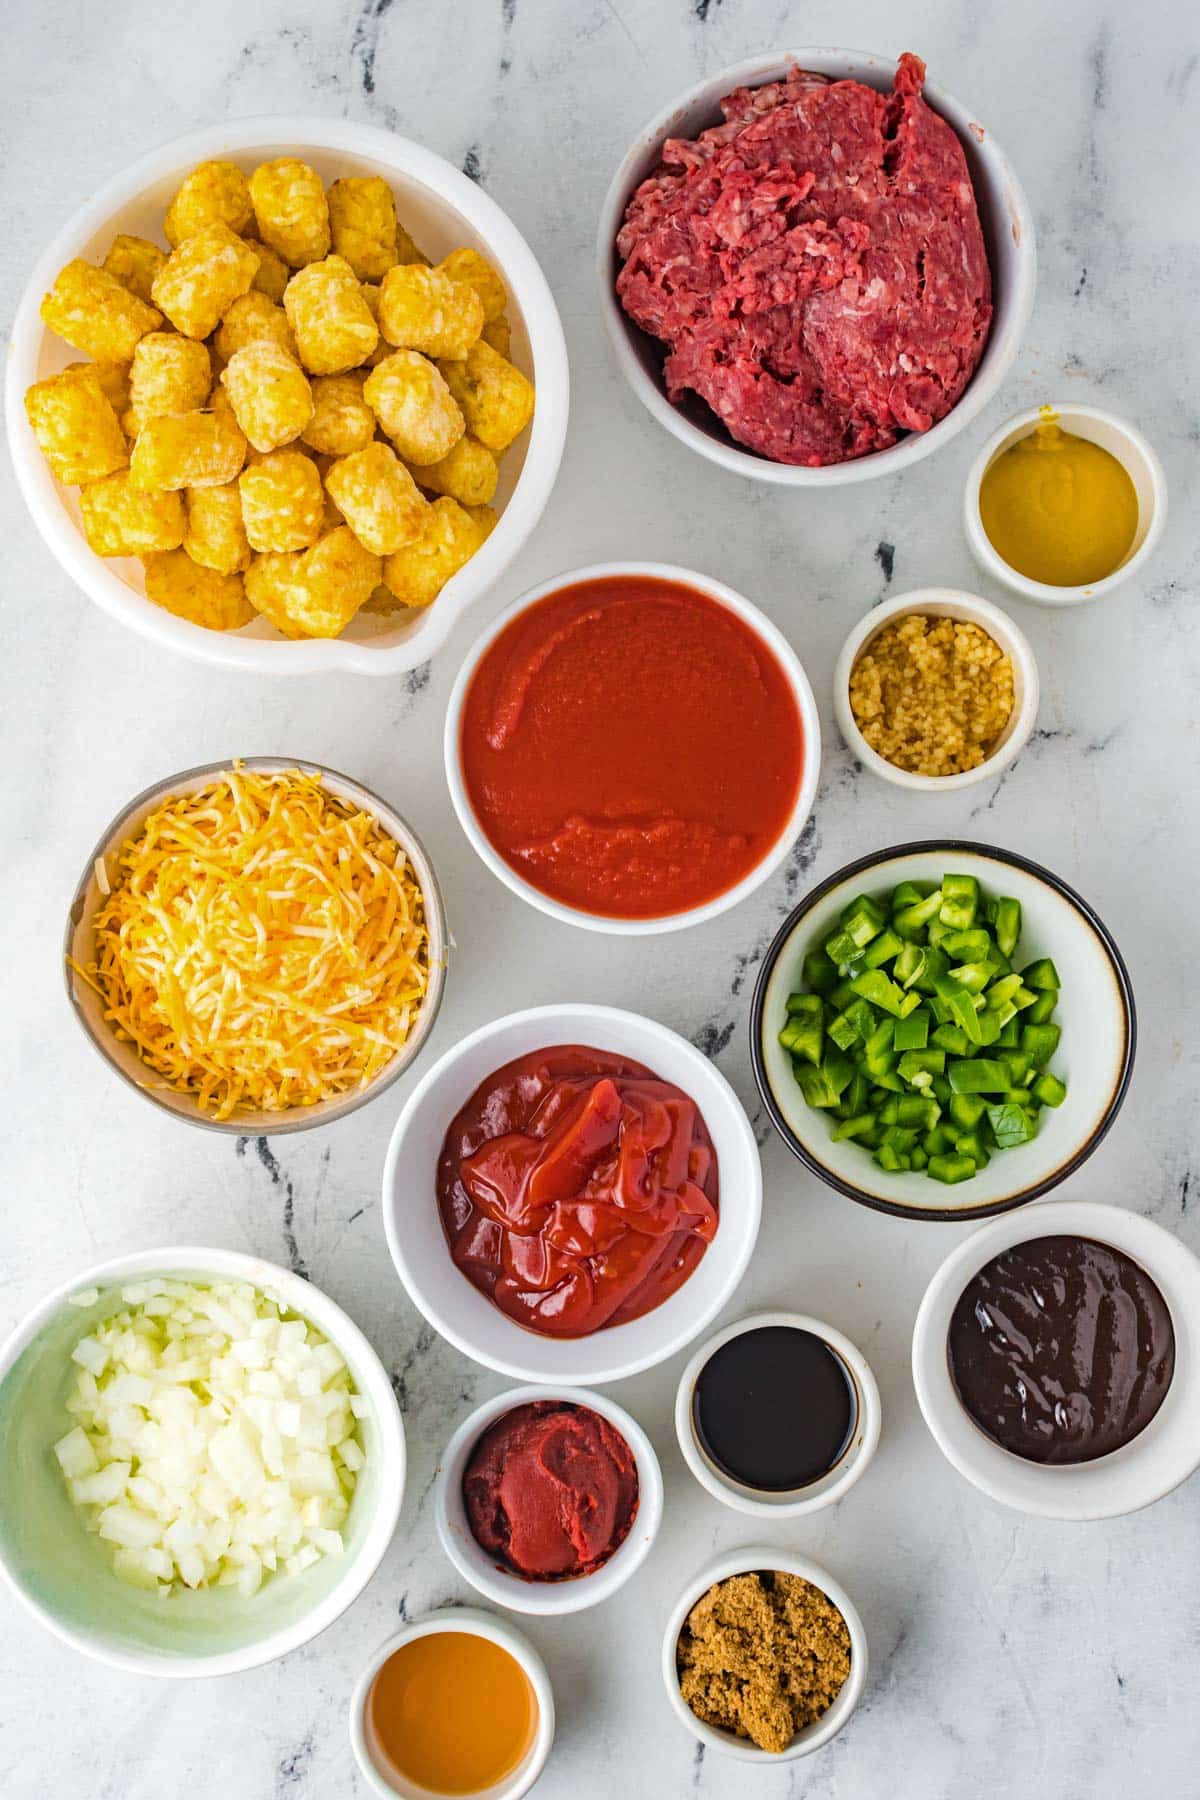 ingredients for sloppy joe tater tot casserole, including onion, cheese, green bell pepper, ketchup, ground beef and brown sugar